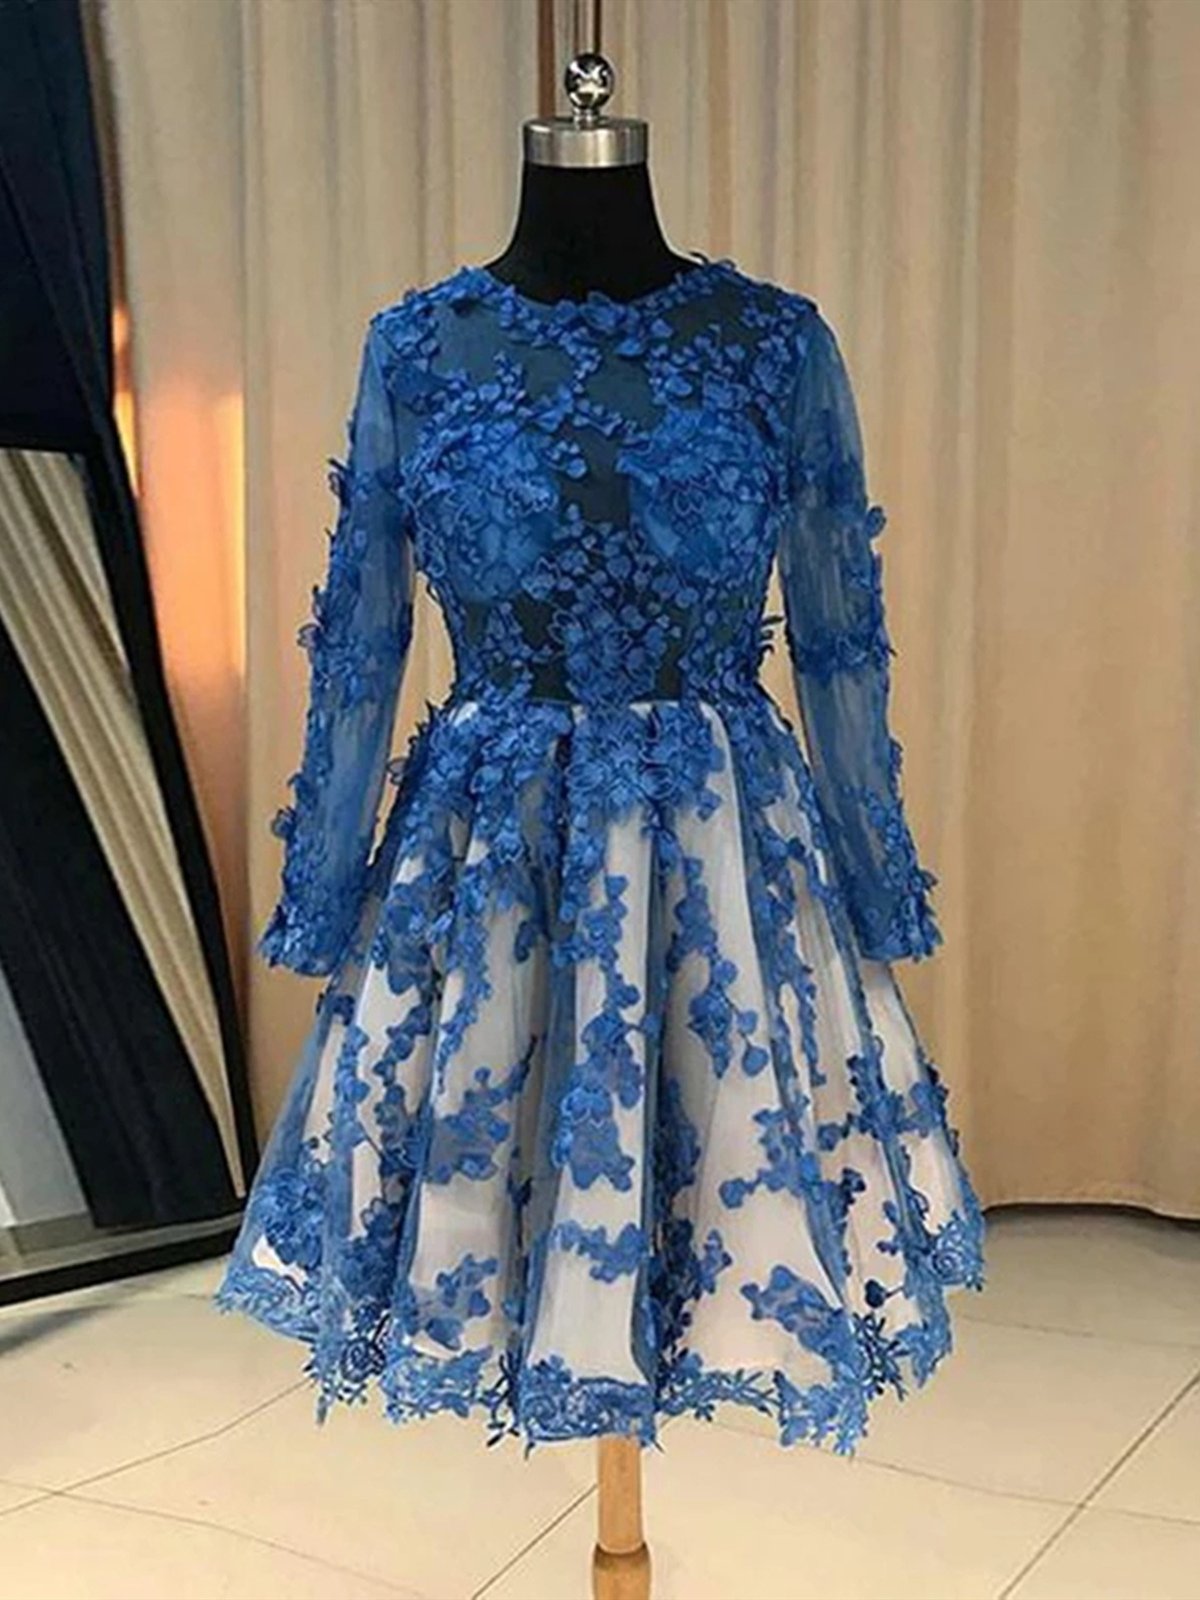 Long Sleeves Short Blue Lace Prom Dresses For Black girls For Women, Short Blue Lace Formal Homecoming Graduation Dresses